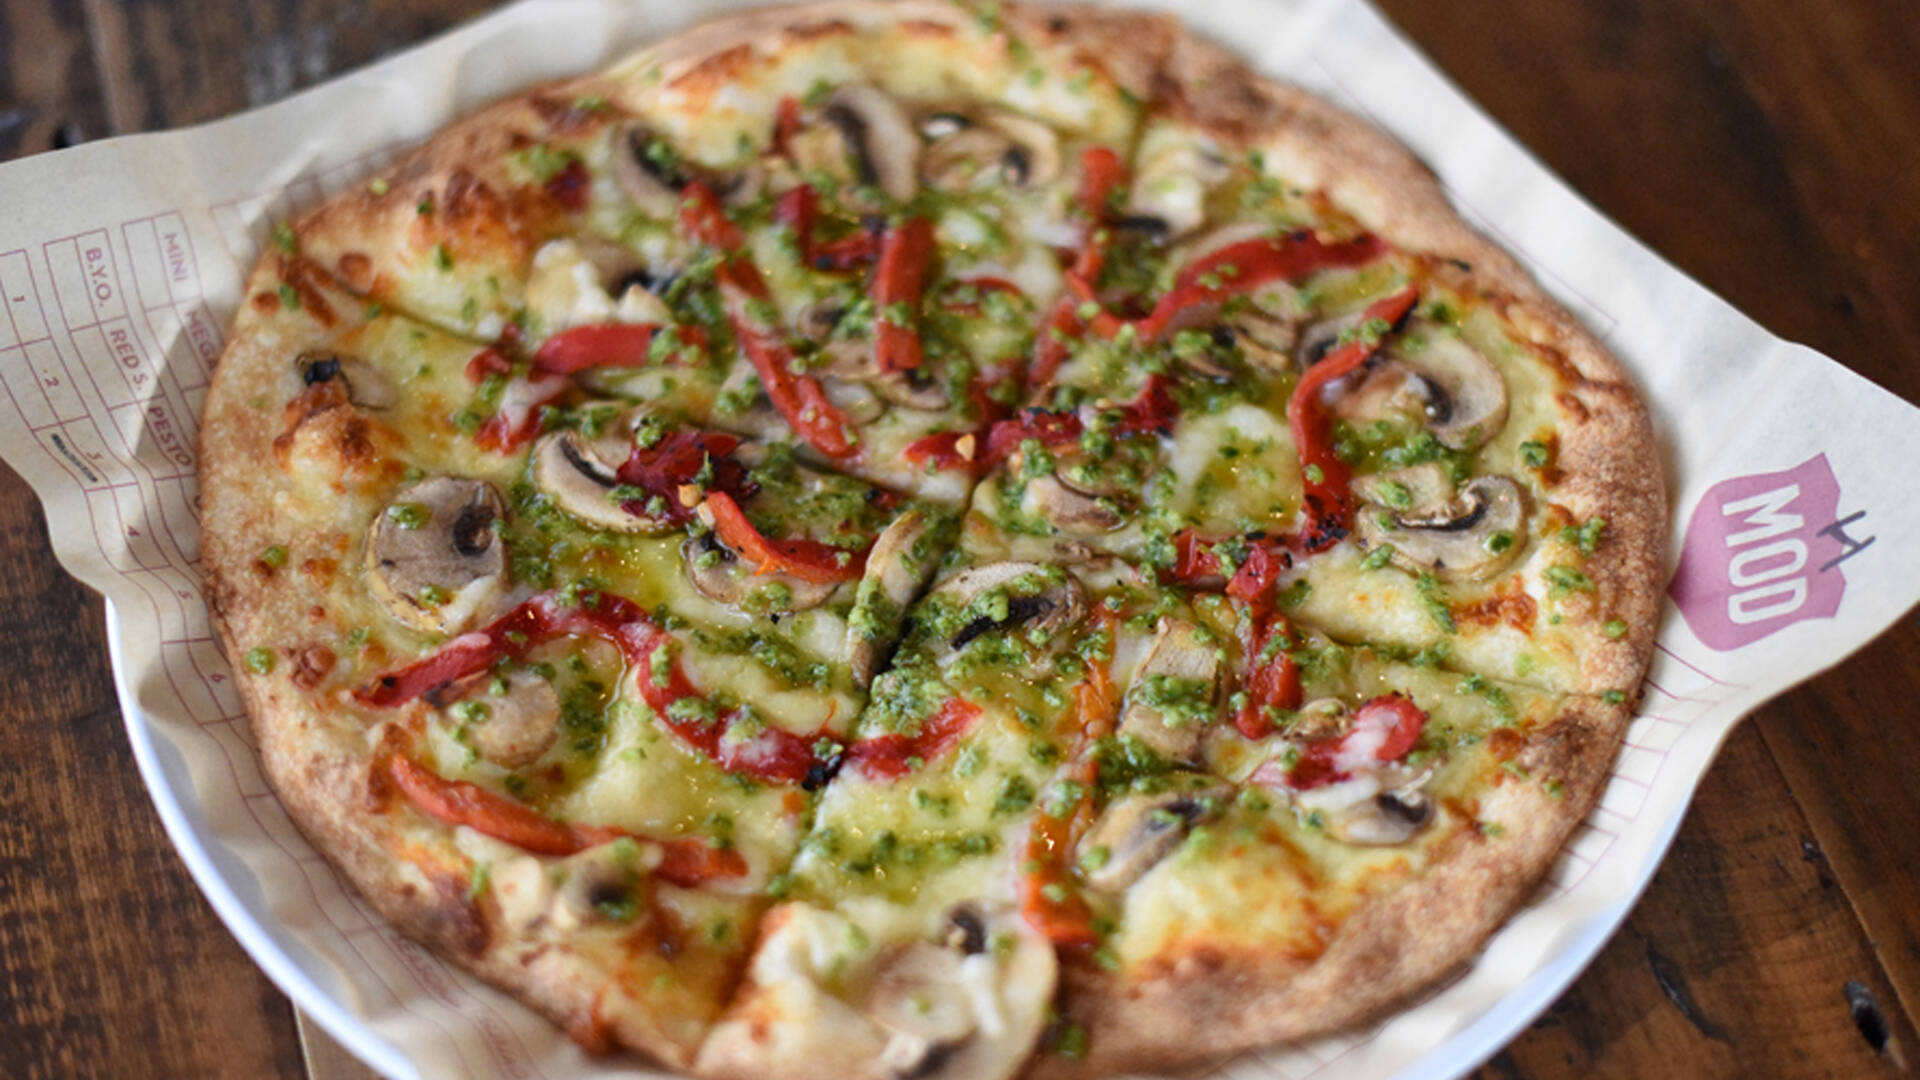 MOD Pizza | Restaurants in Leicester Square, London